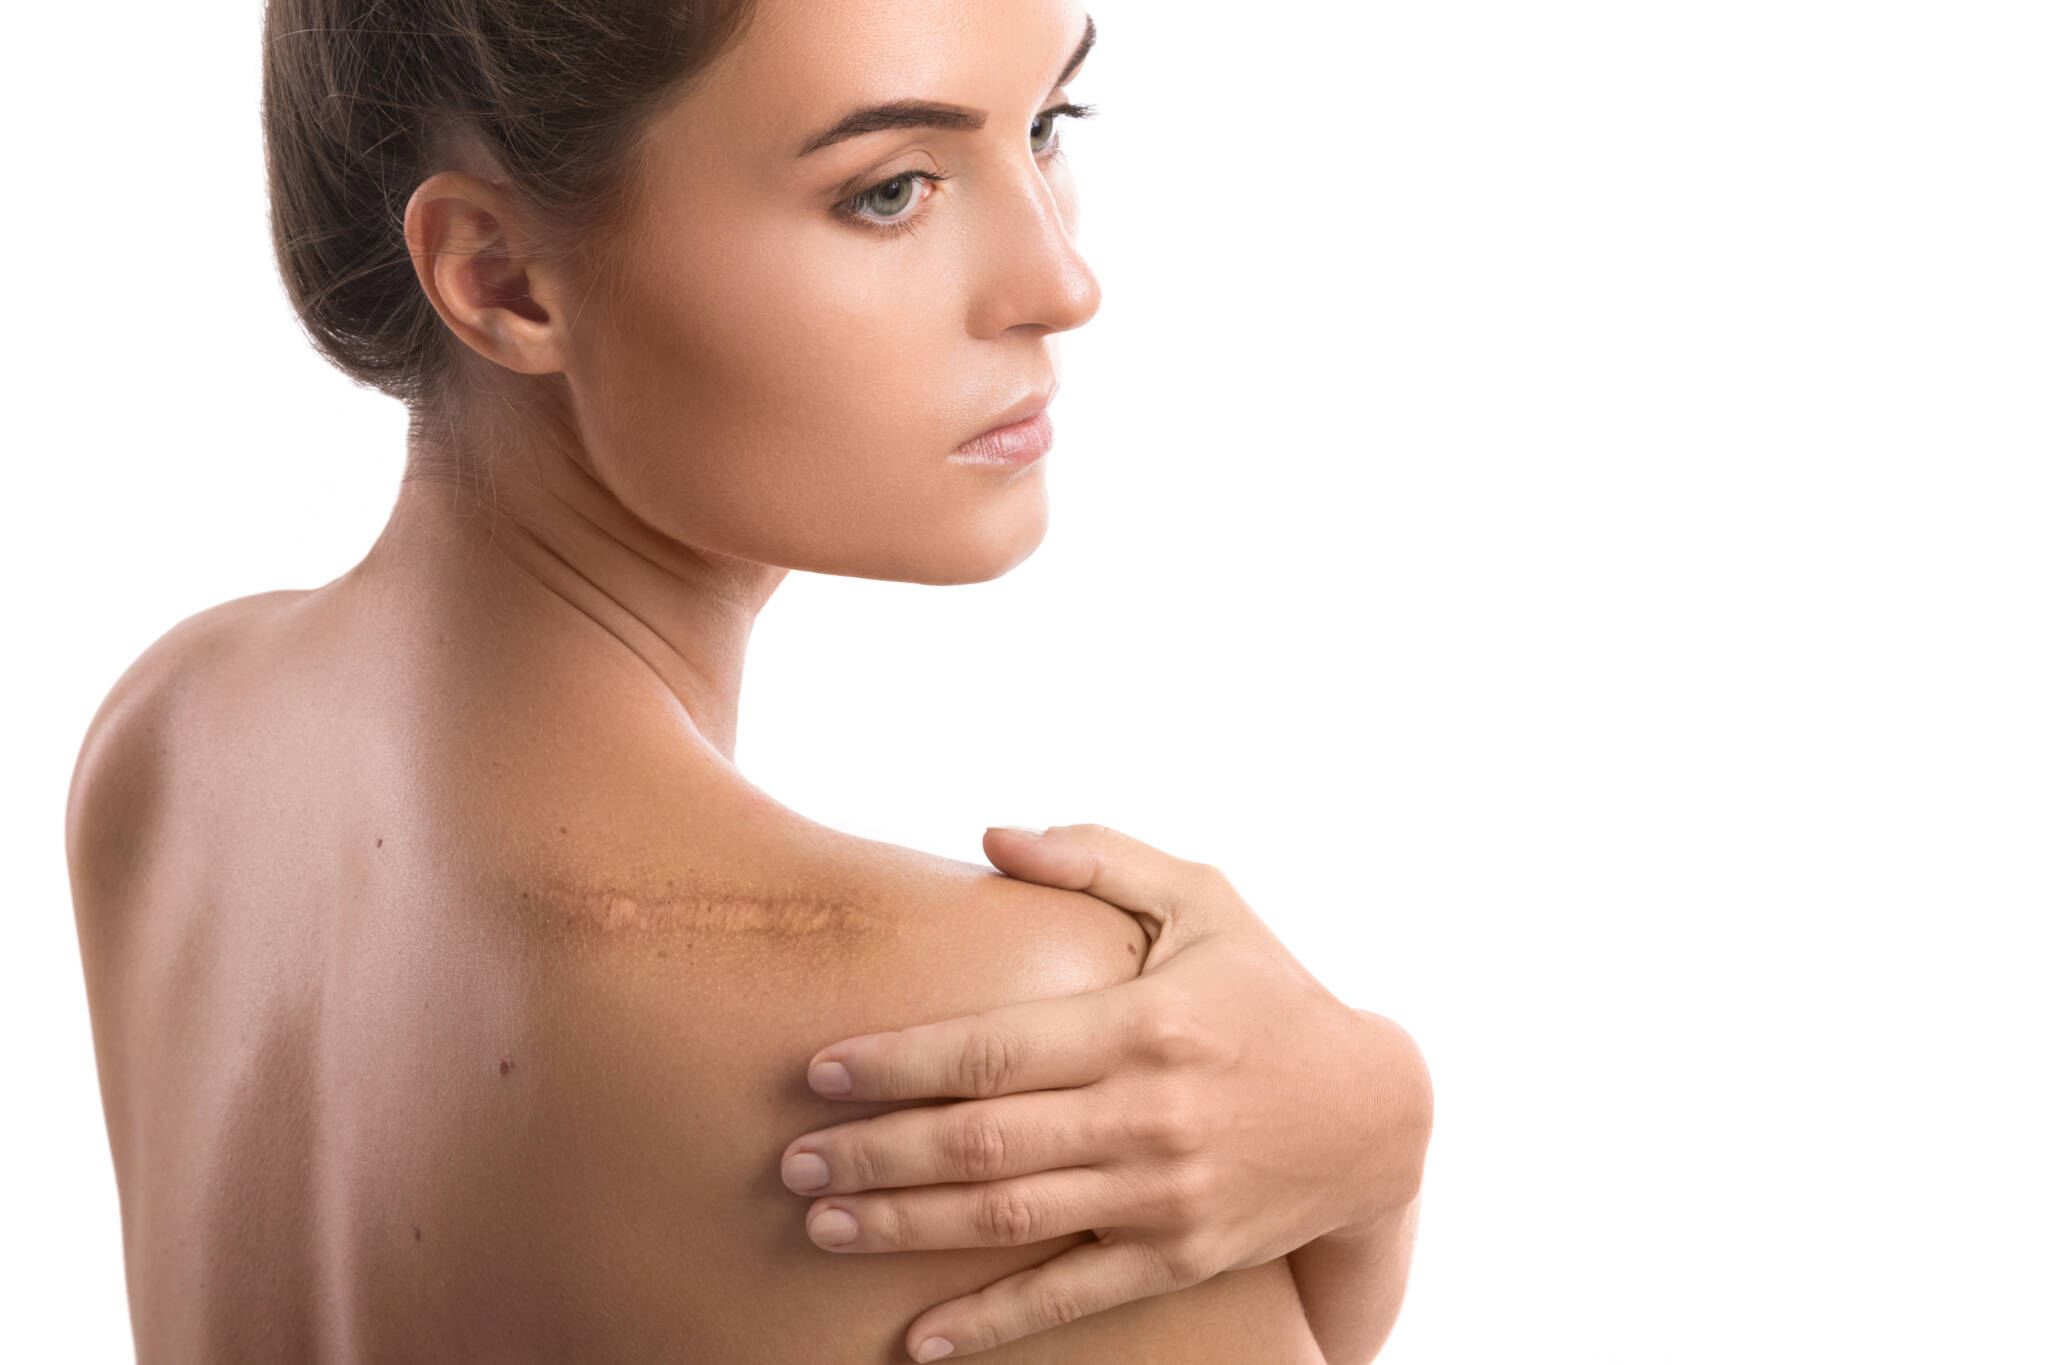 Woman posing with Scar on her shoulder, thinking about innovative scar treatments.